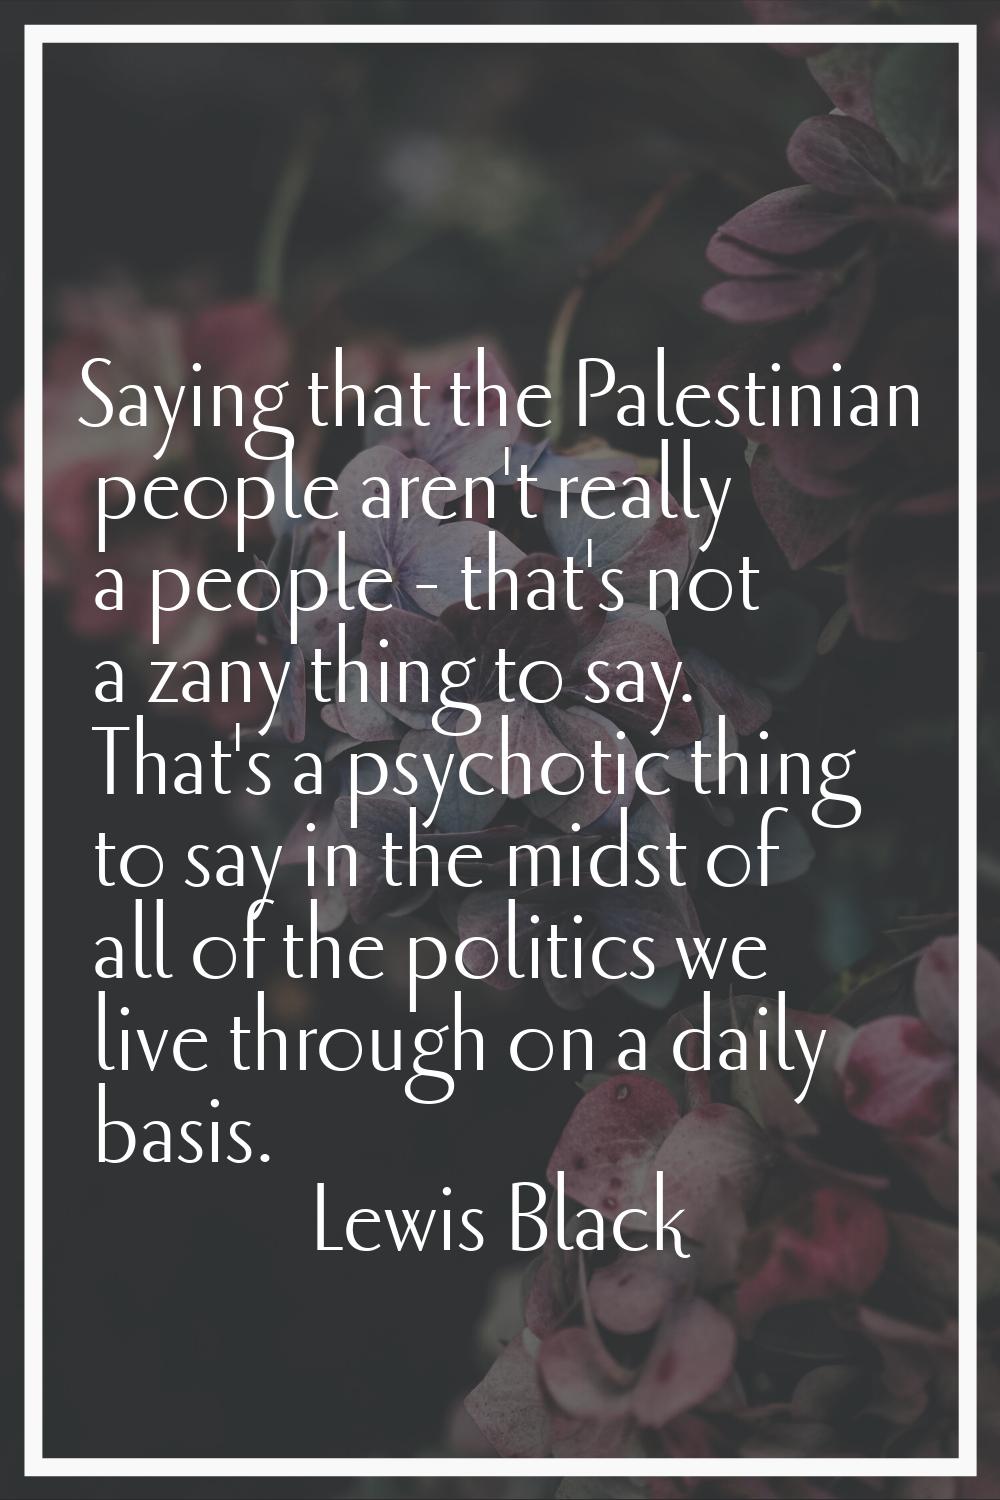 Saying that the Palestinian people aren't really a people - that's not a zany thing to say. That's 